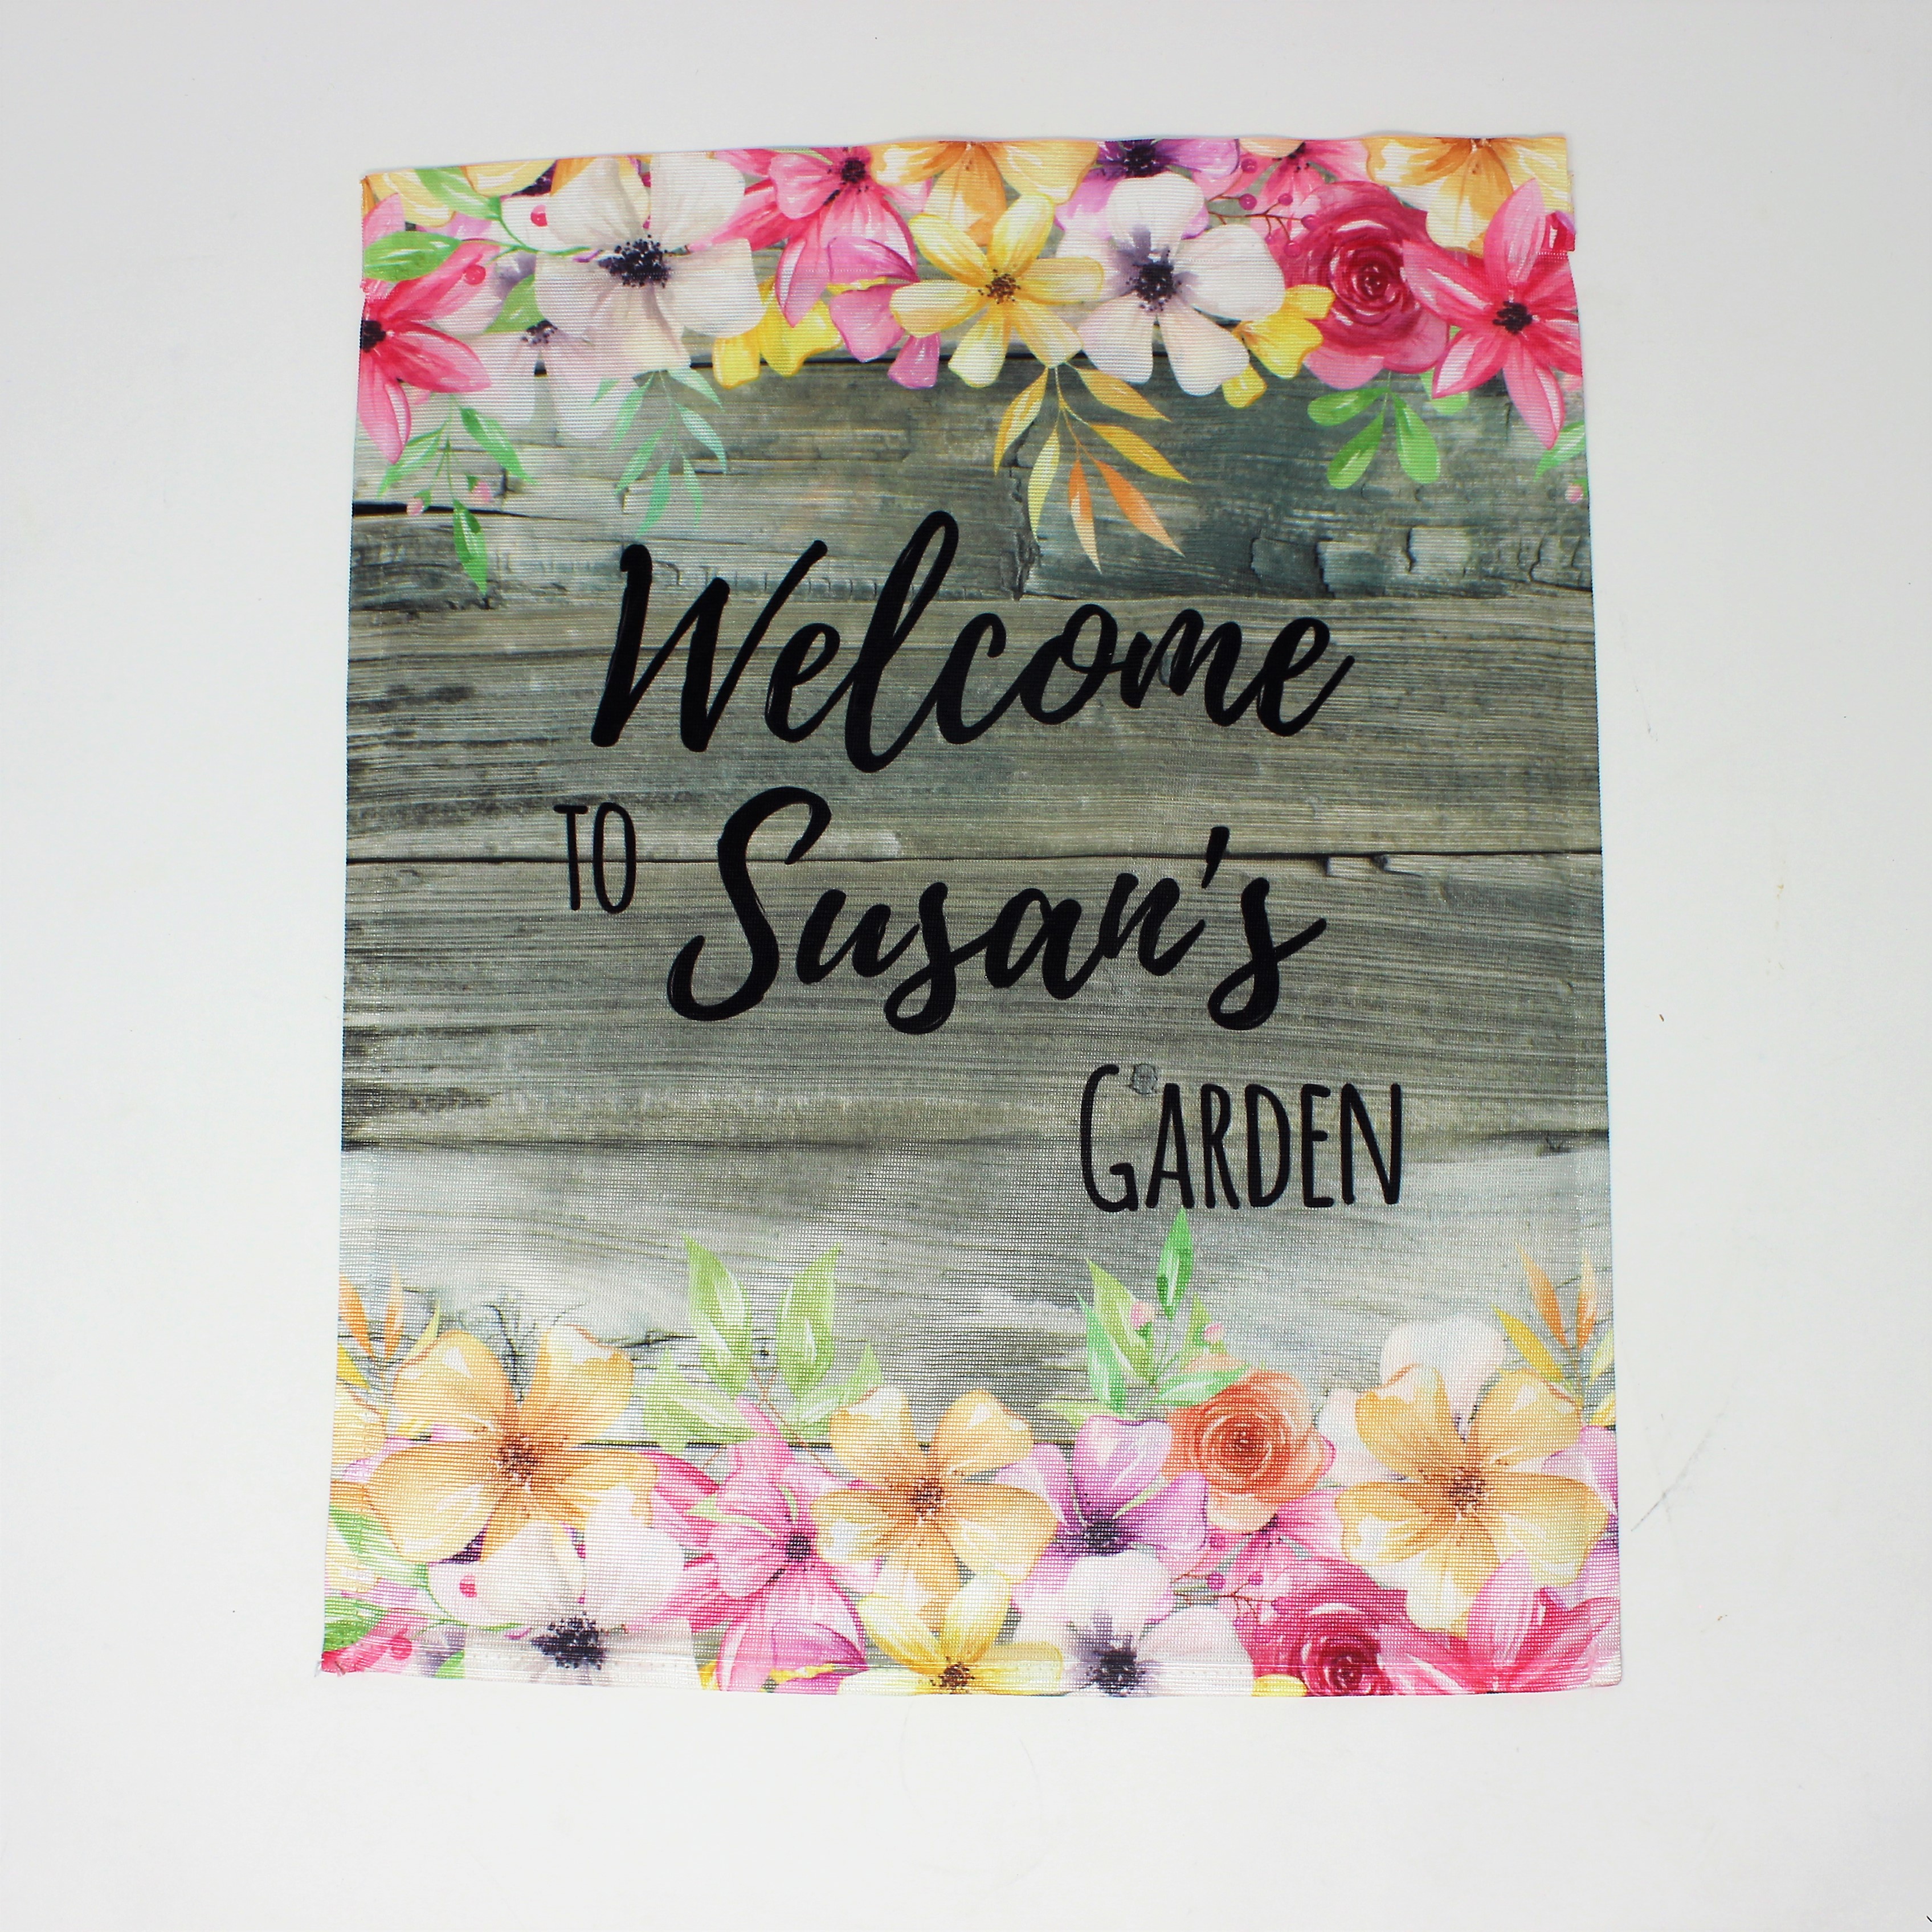 Personalized Garden Flag made with sublimation printing